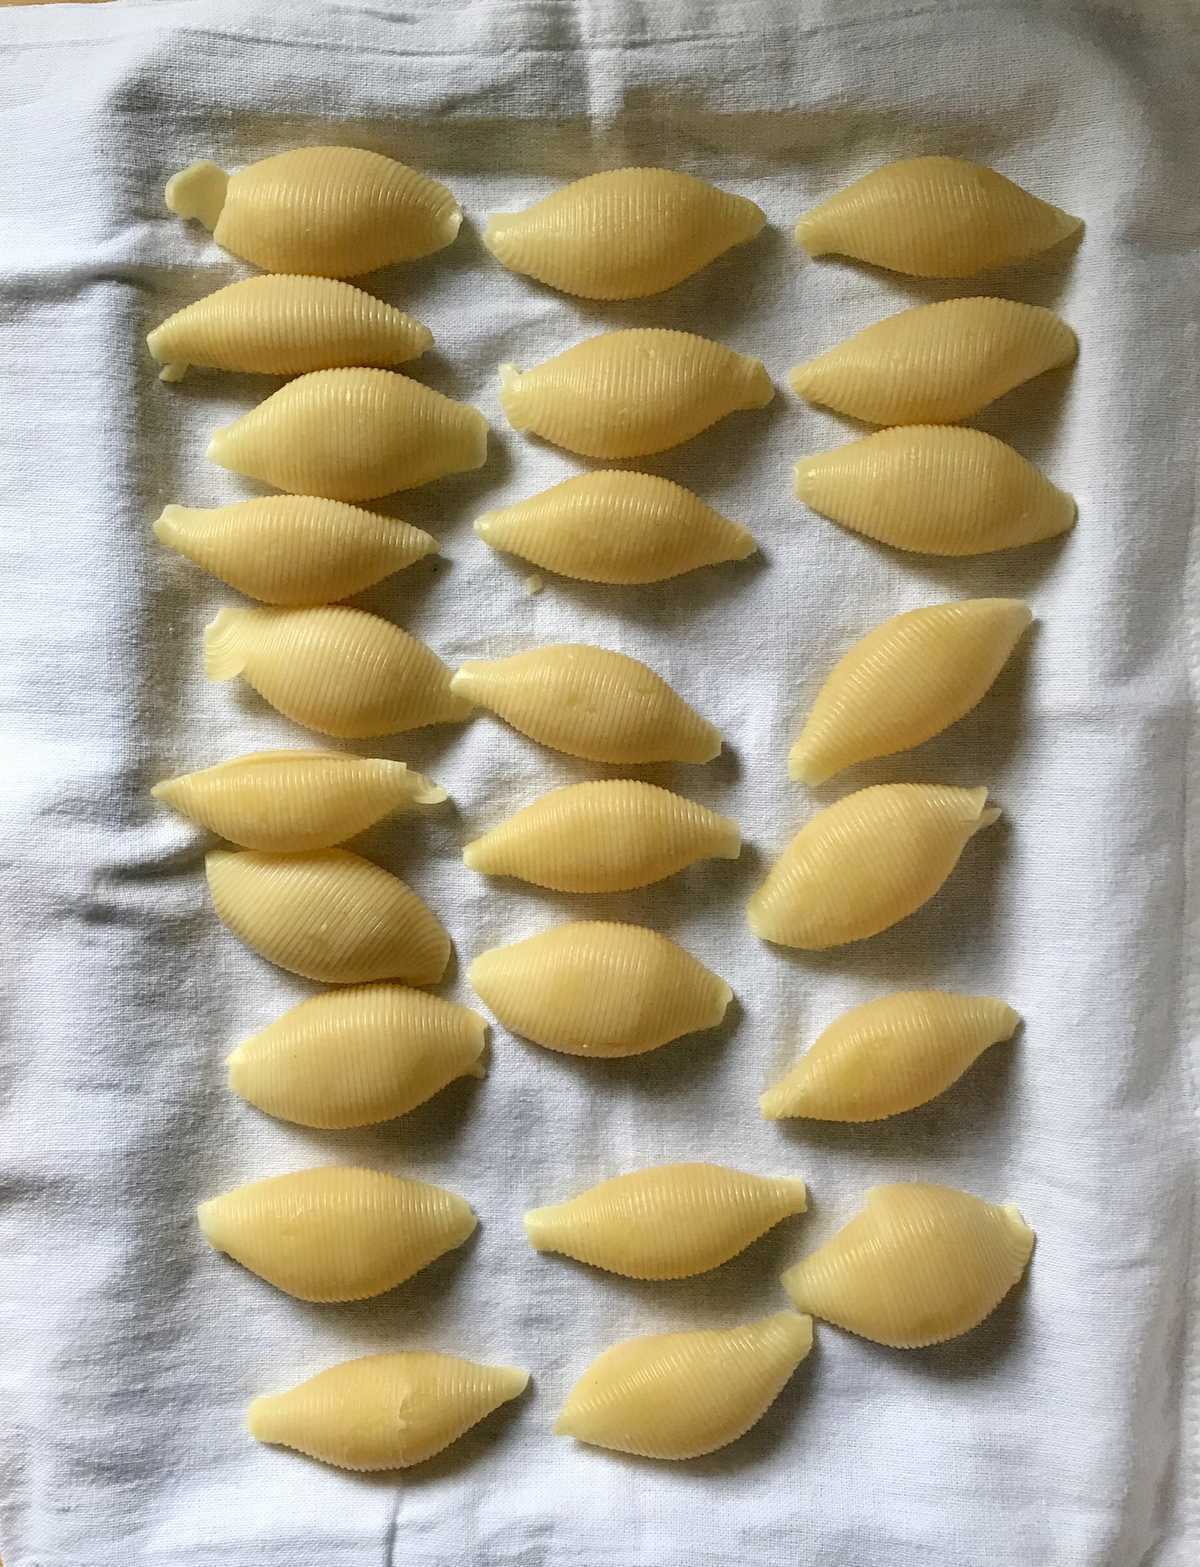 Giant pasta shells are placed upside down on a clean tea towel.